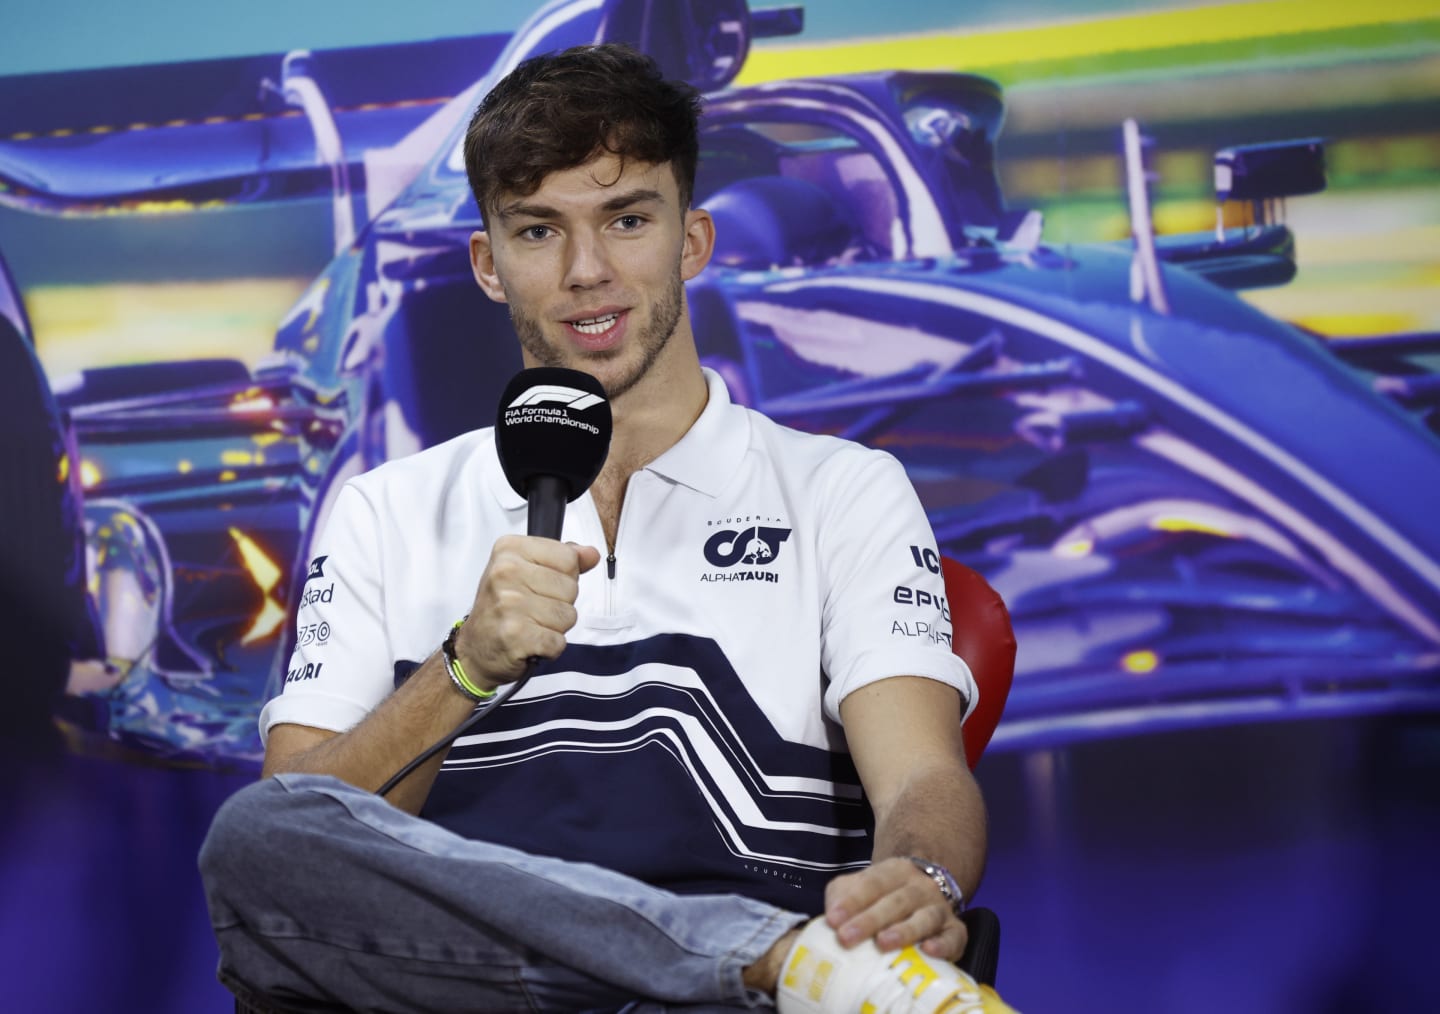 SAO PAULO, BRAZIL - NOVEMBER 10: Pierre Gasly of France and Scuderia AlphaTauri attends the Drivers Press Conference during previews ahead of the F1 Grand Prix of Brazil at Autodromo Jose Carlos Pace on November 10, 2022 in Sao Paulo, Brazil. (Photo by Jared C. Tilton/Getty Images)